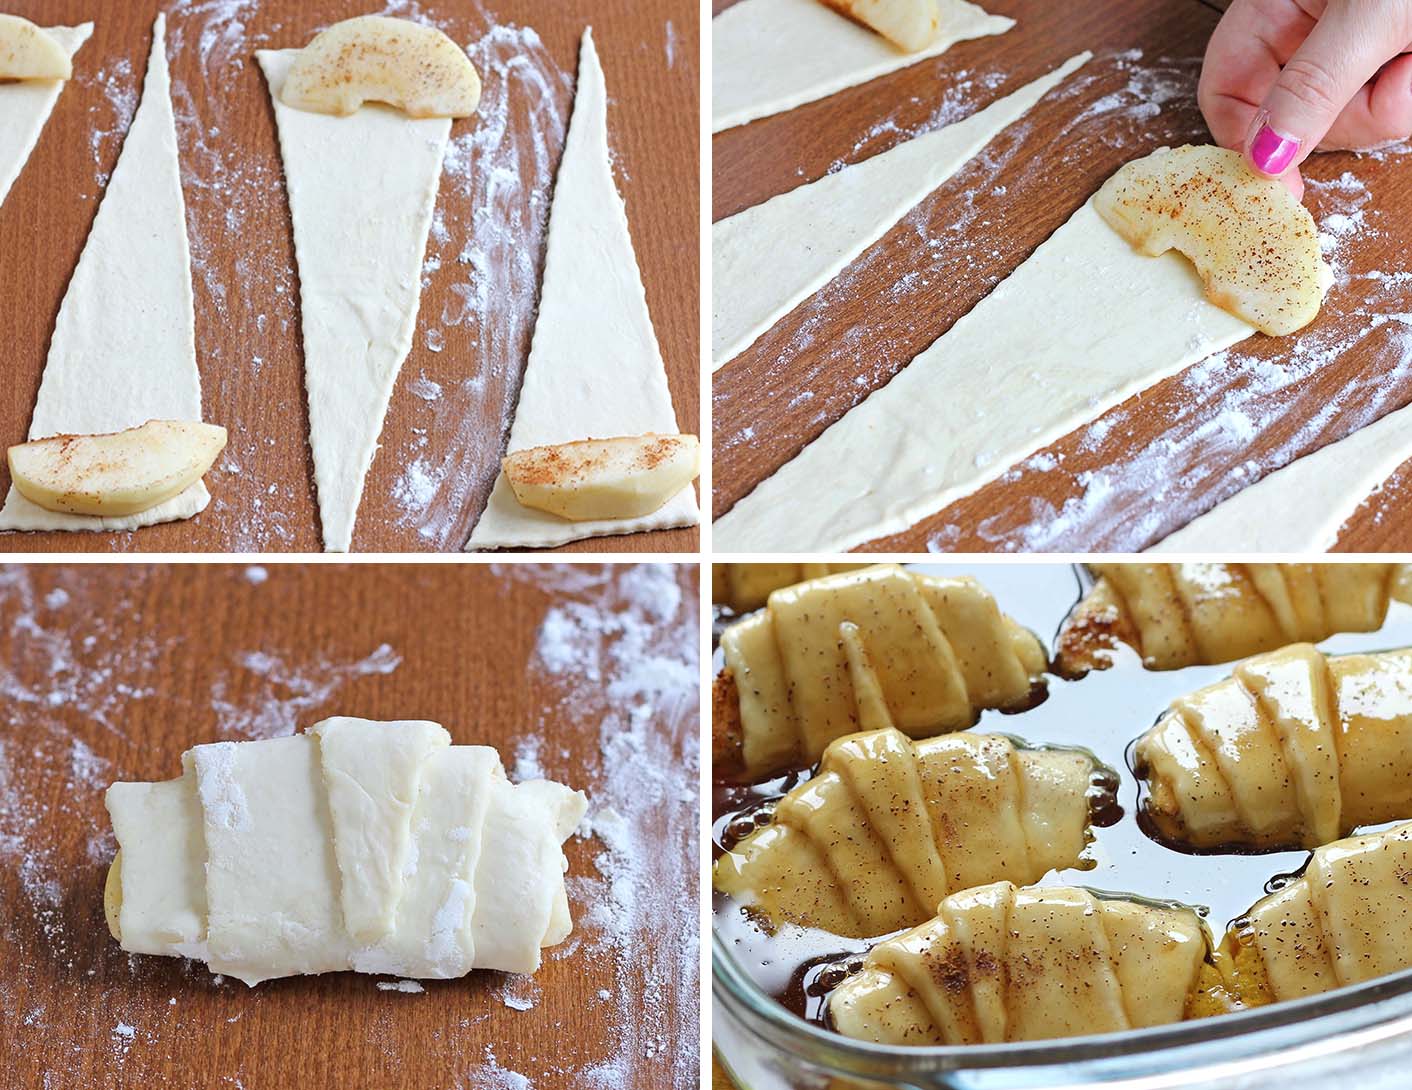 Don’t be fooled by the ingredients. The Crescent rolls stuffed with apple, cinnamon sugar and Mountain Dew does something similar to magic in the pan.